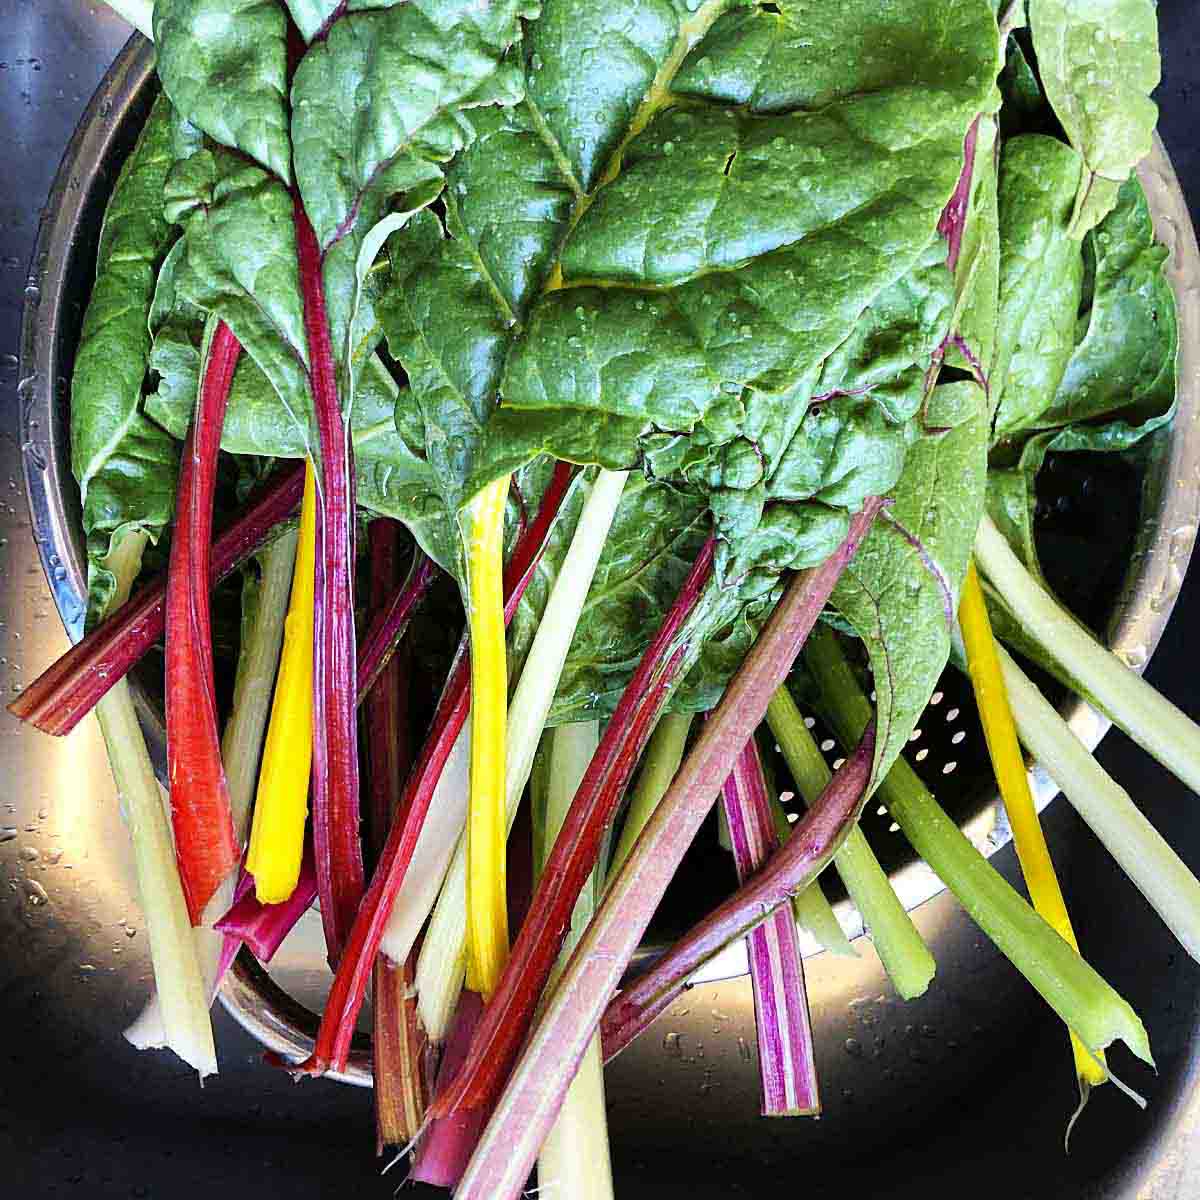 Red, pink, yellow and white Swiss Chard stems freshly washed.